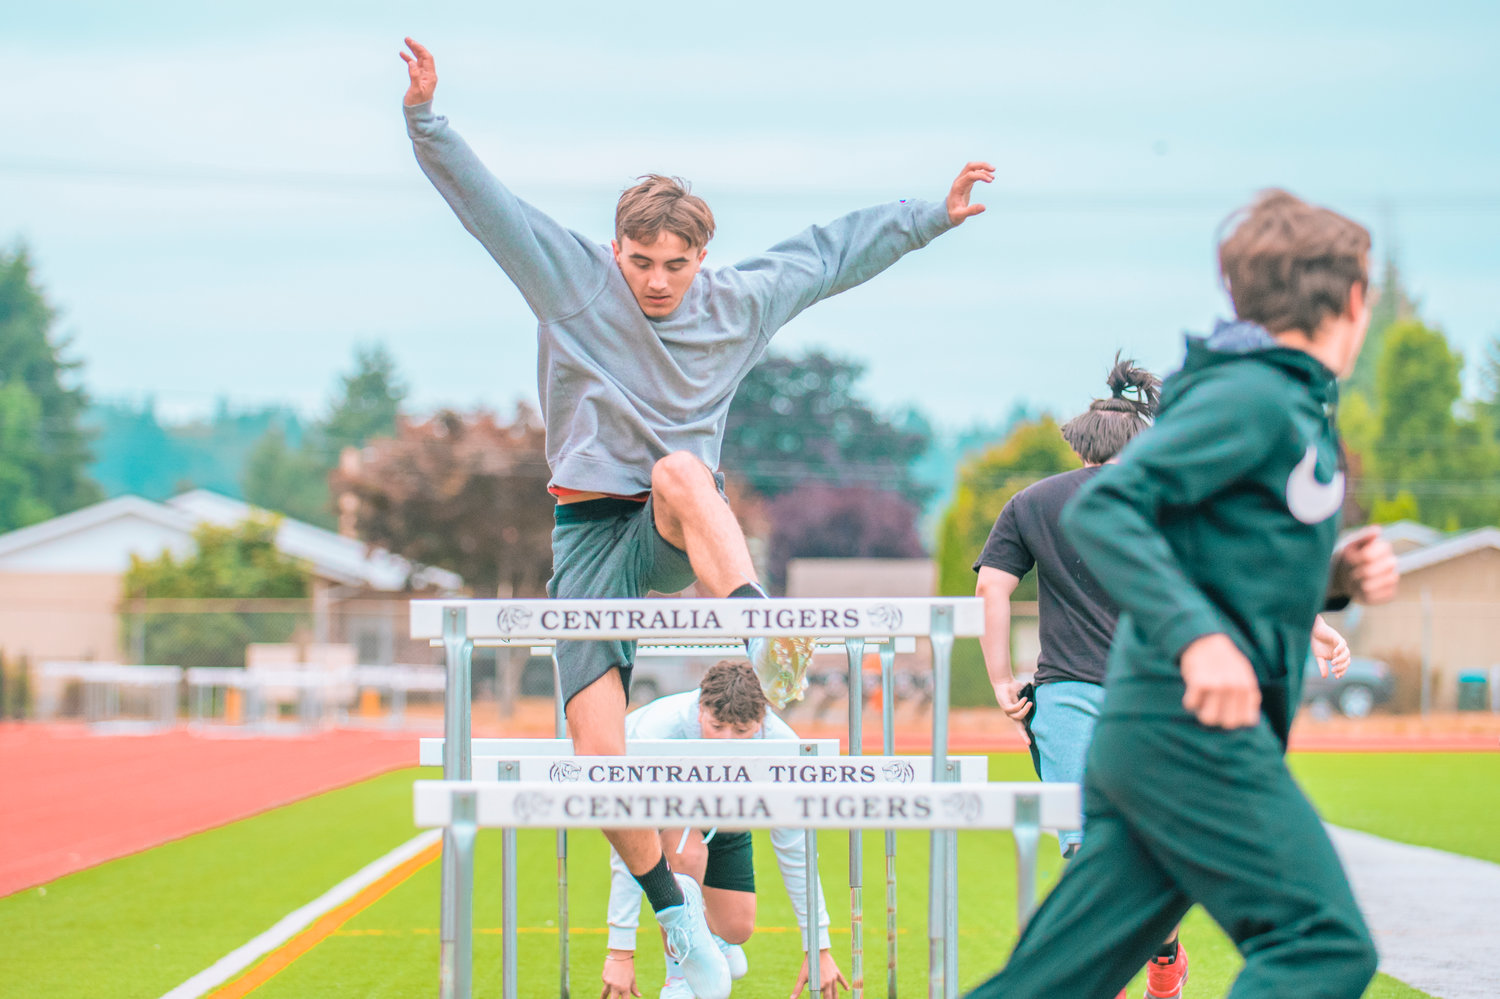 Centralia's Caiden Sobolesky leaps over a hurdle during the opening day of football practice on Wednesday.